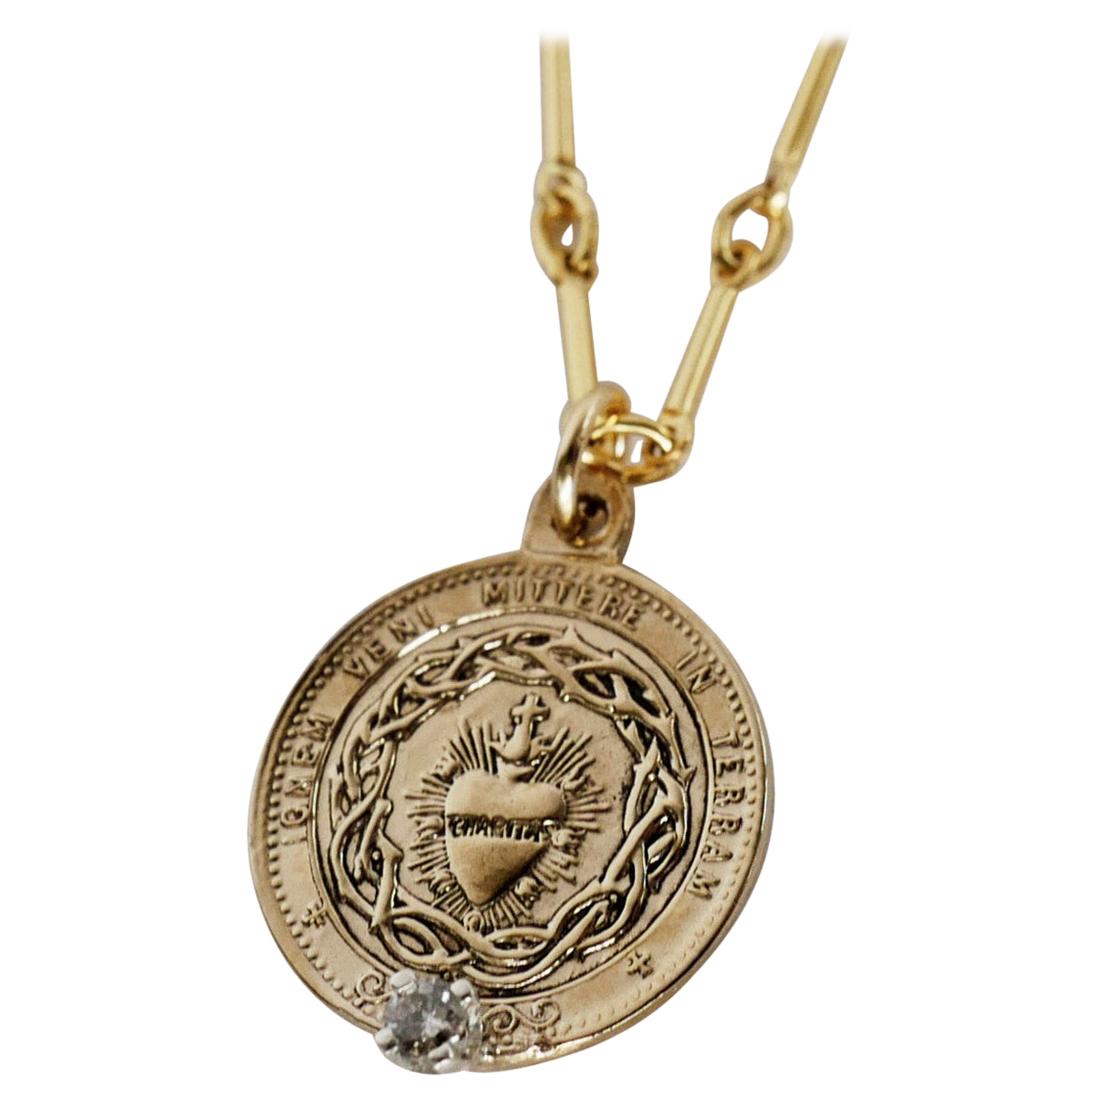 White Diamond Sacred Heart Coin Medal Pendant Chain Necklace

The Sacred Heart (also known as the Sacred Heart of Jesus) has one of the deepest meanings in the Roman Catholic practice. The symbol represents Jesus Christ’s actual heart as His love